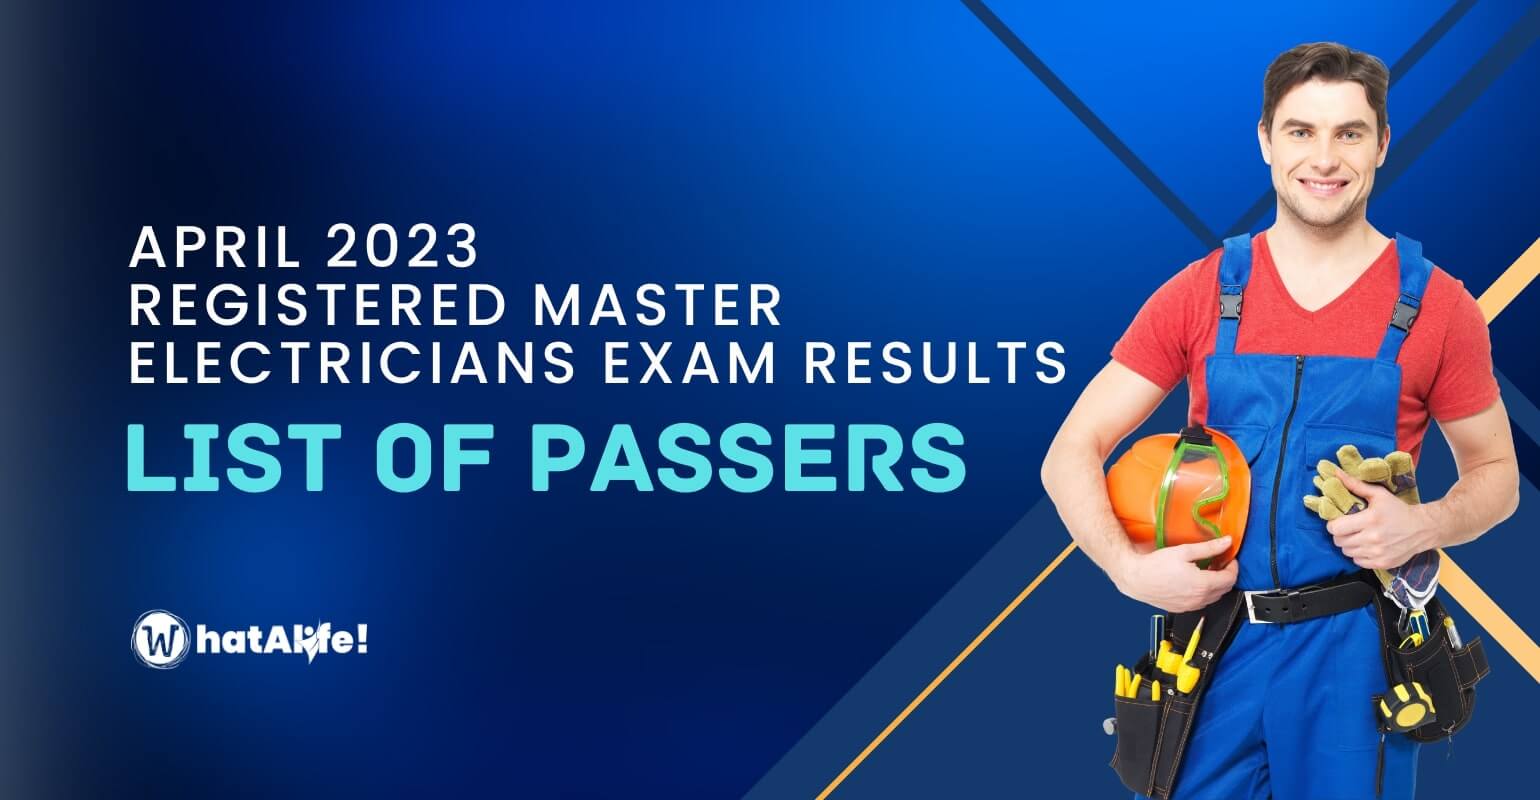 full list of passers april 2023 registered master electrician licensure exam results